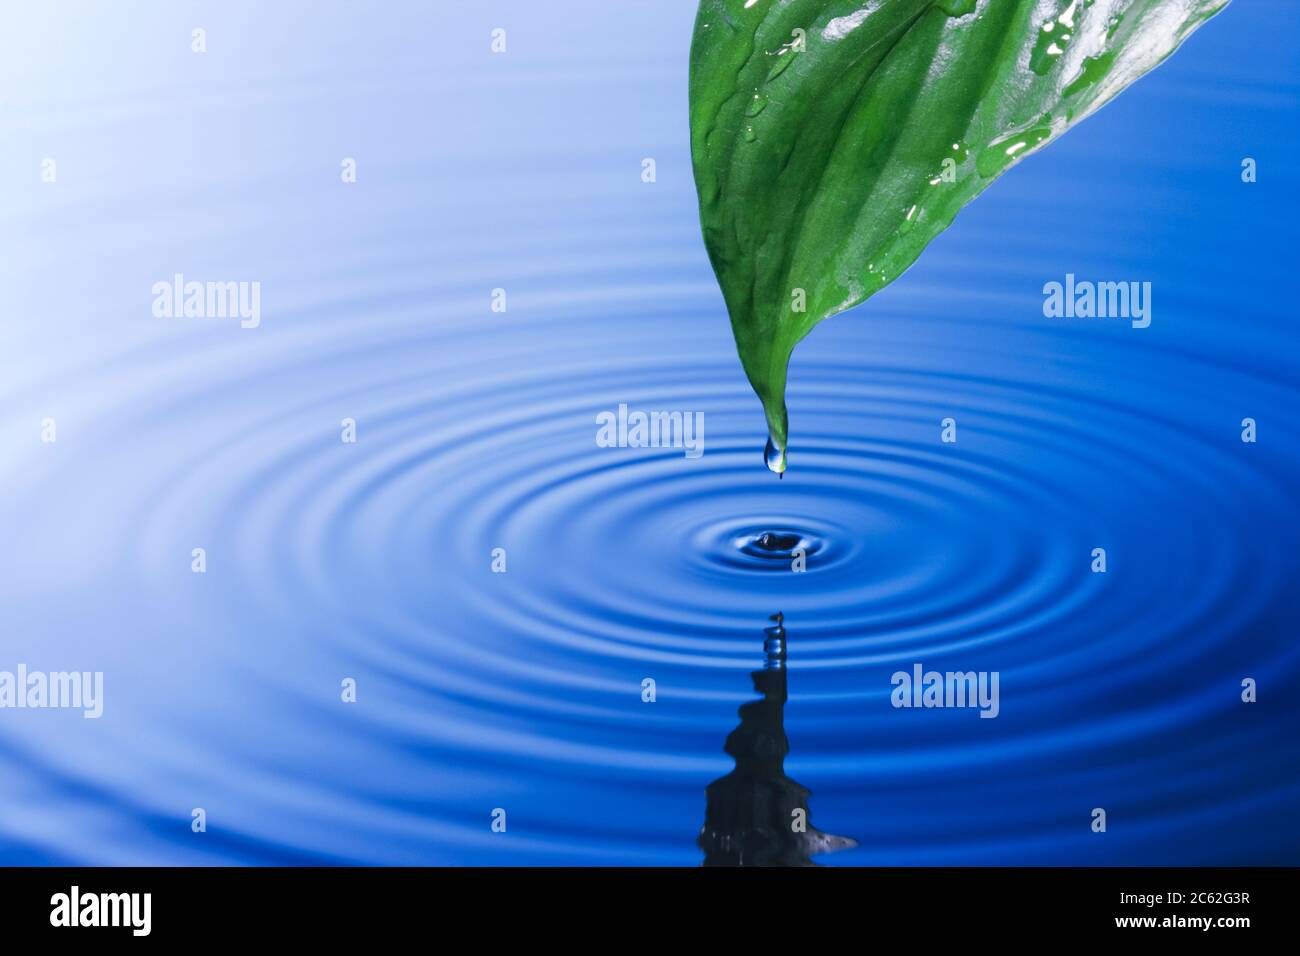 Water droplet falling from leaf causing ripples Stock Photo